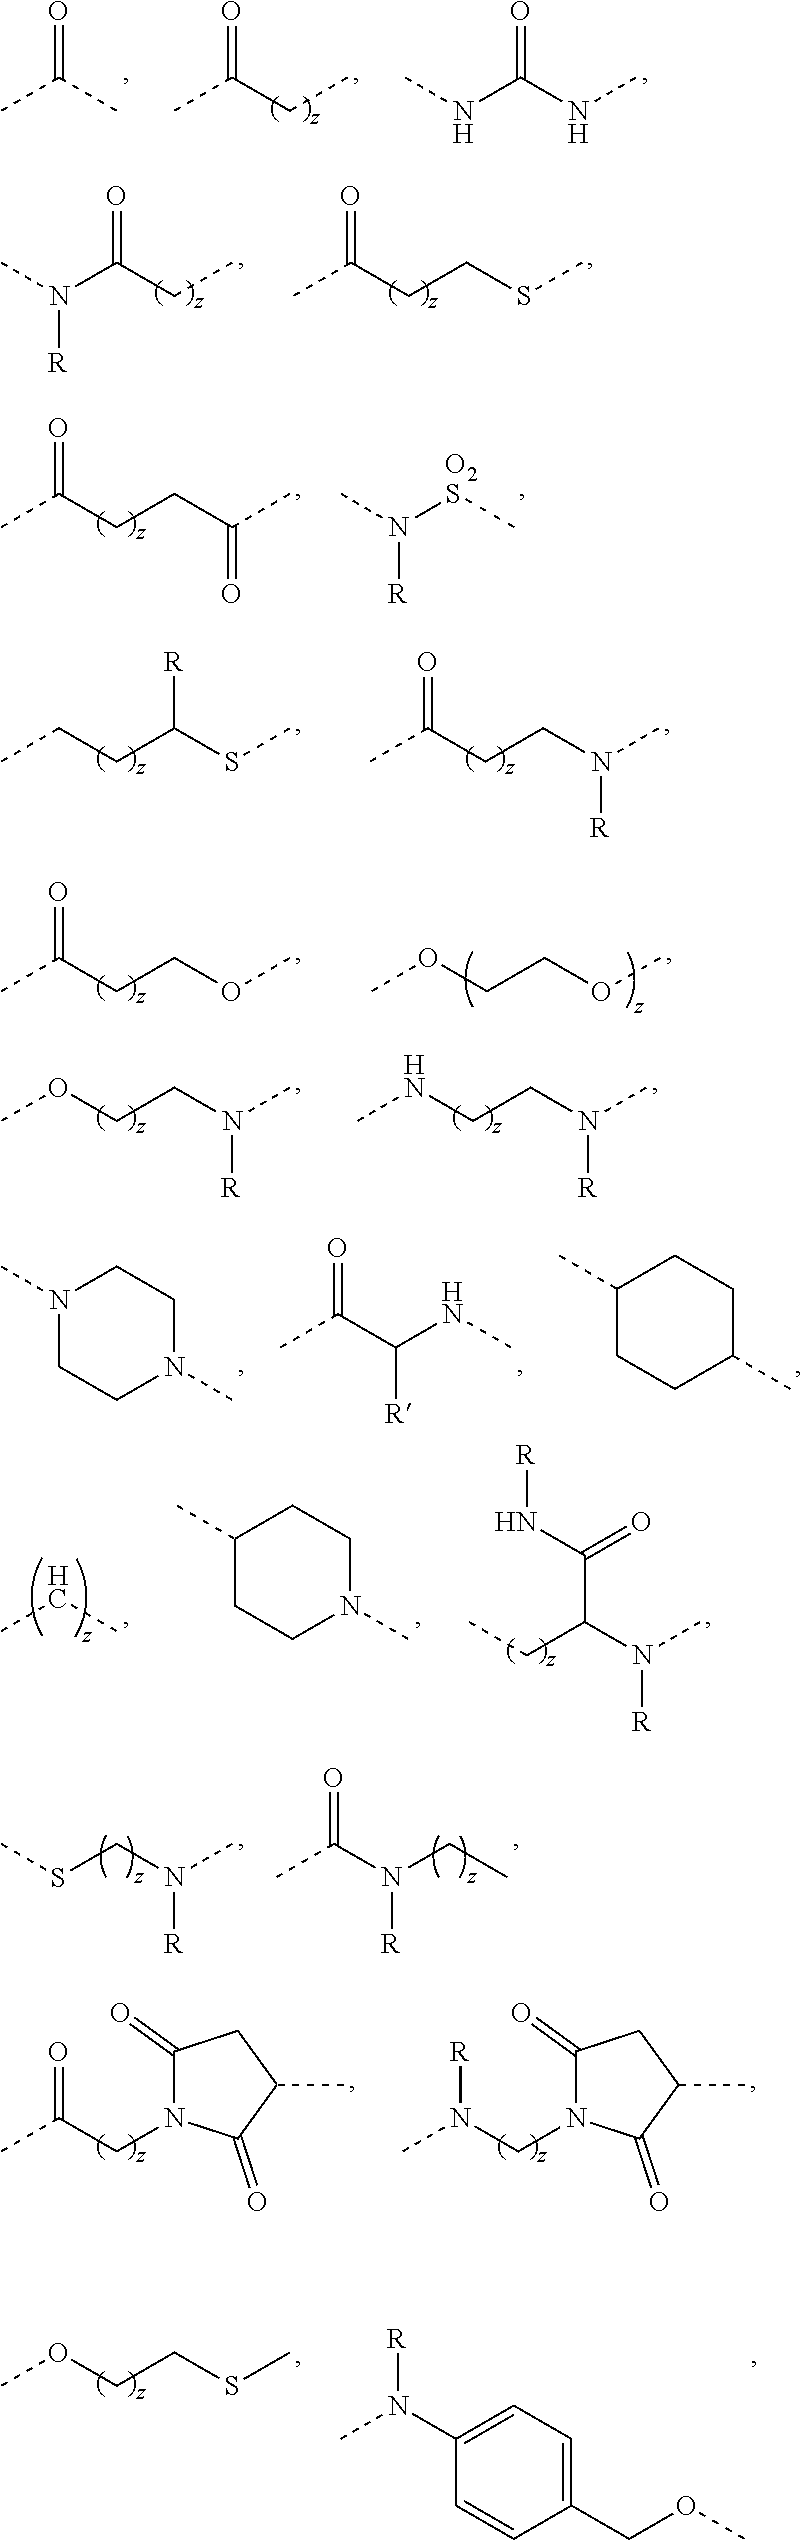 Stapled peptide conjugates and particles